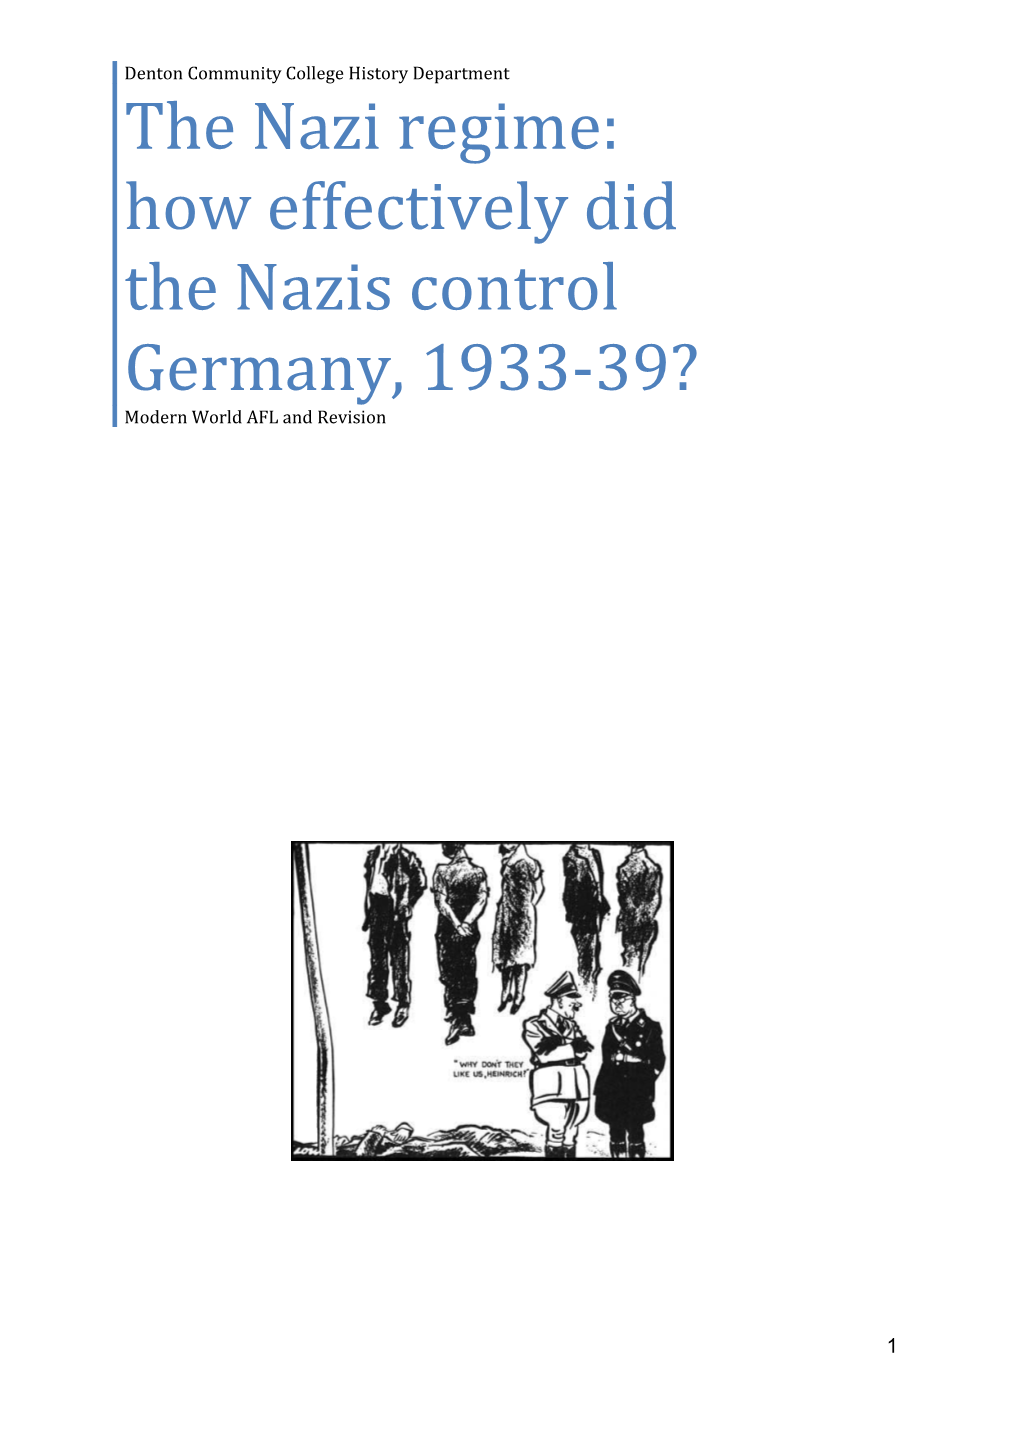 The Nazi Regime: How Effectively Did the Nazis Control Germany, 1933-39?